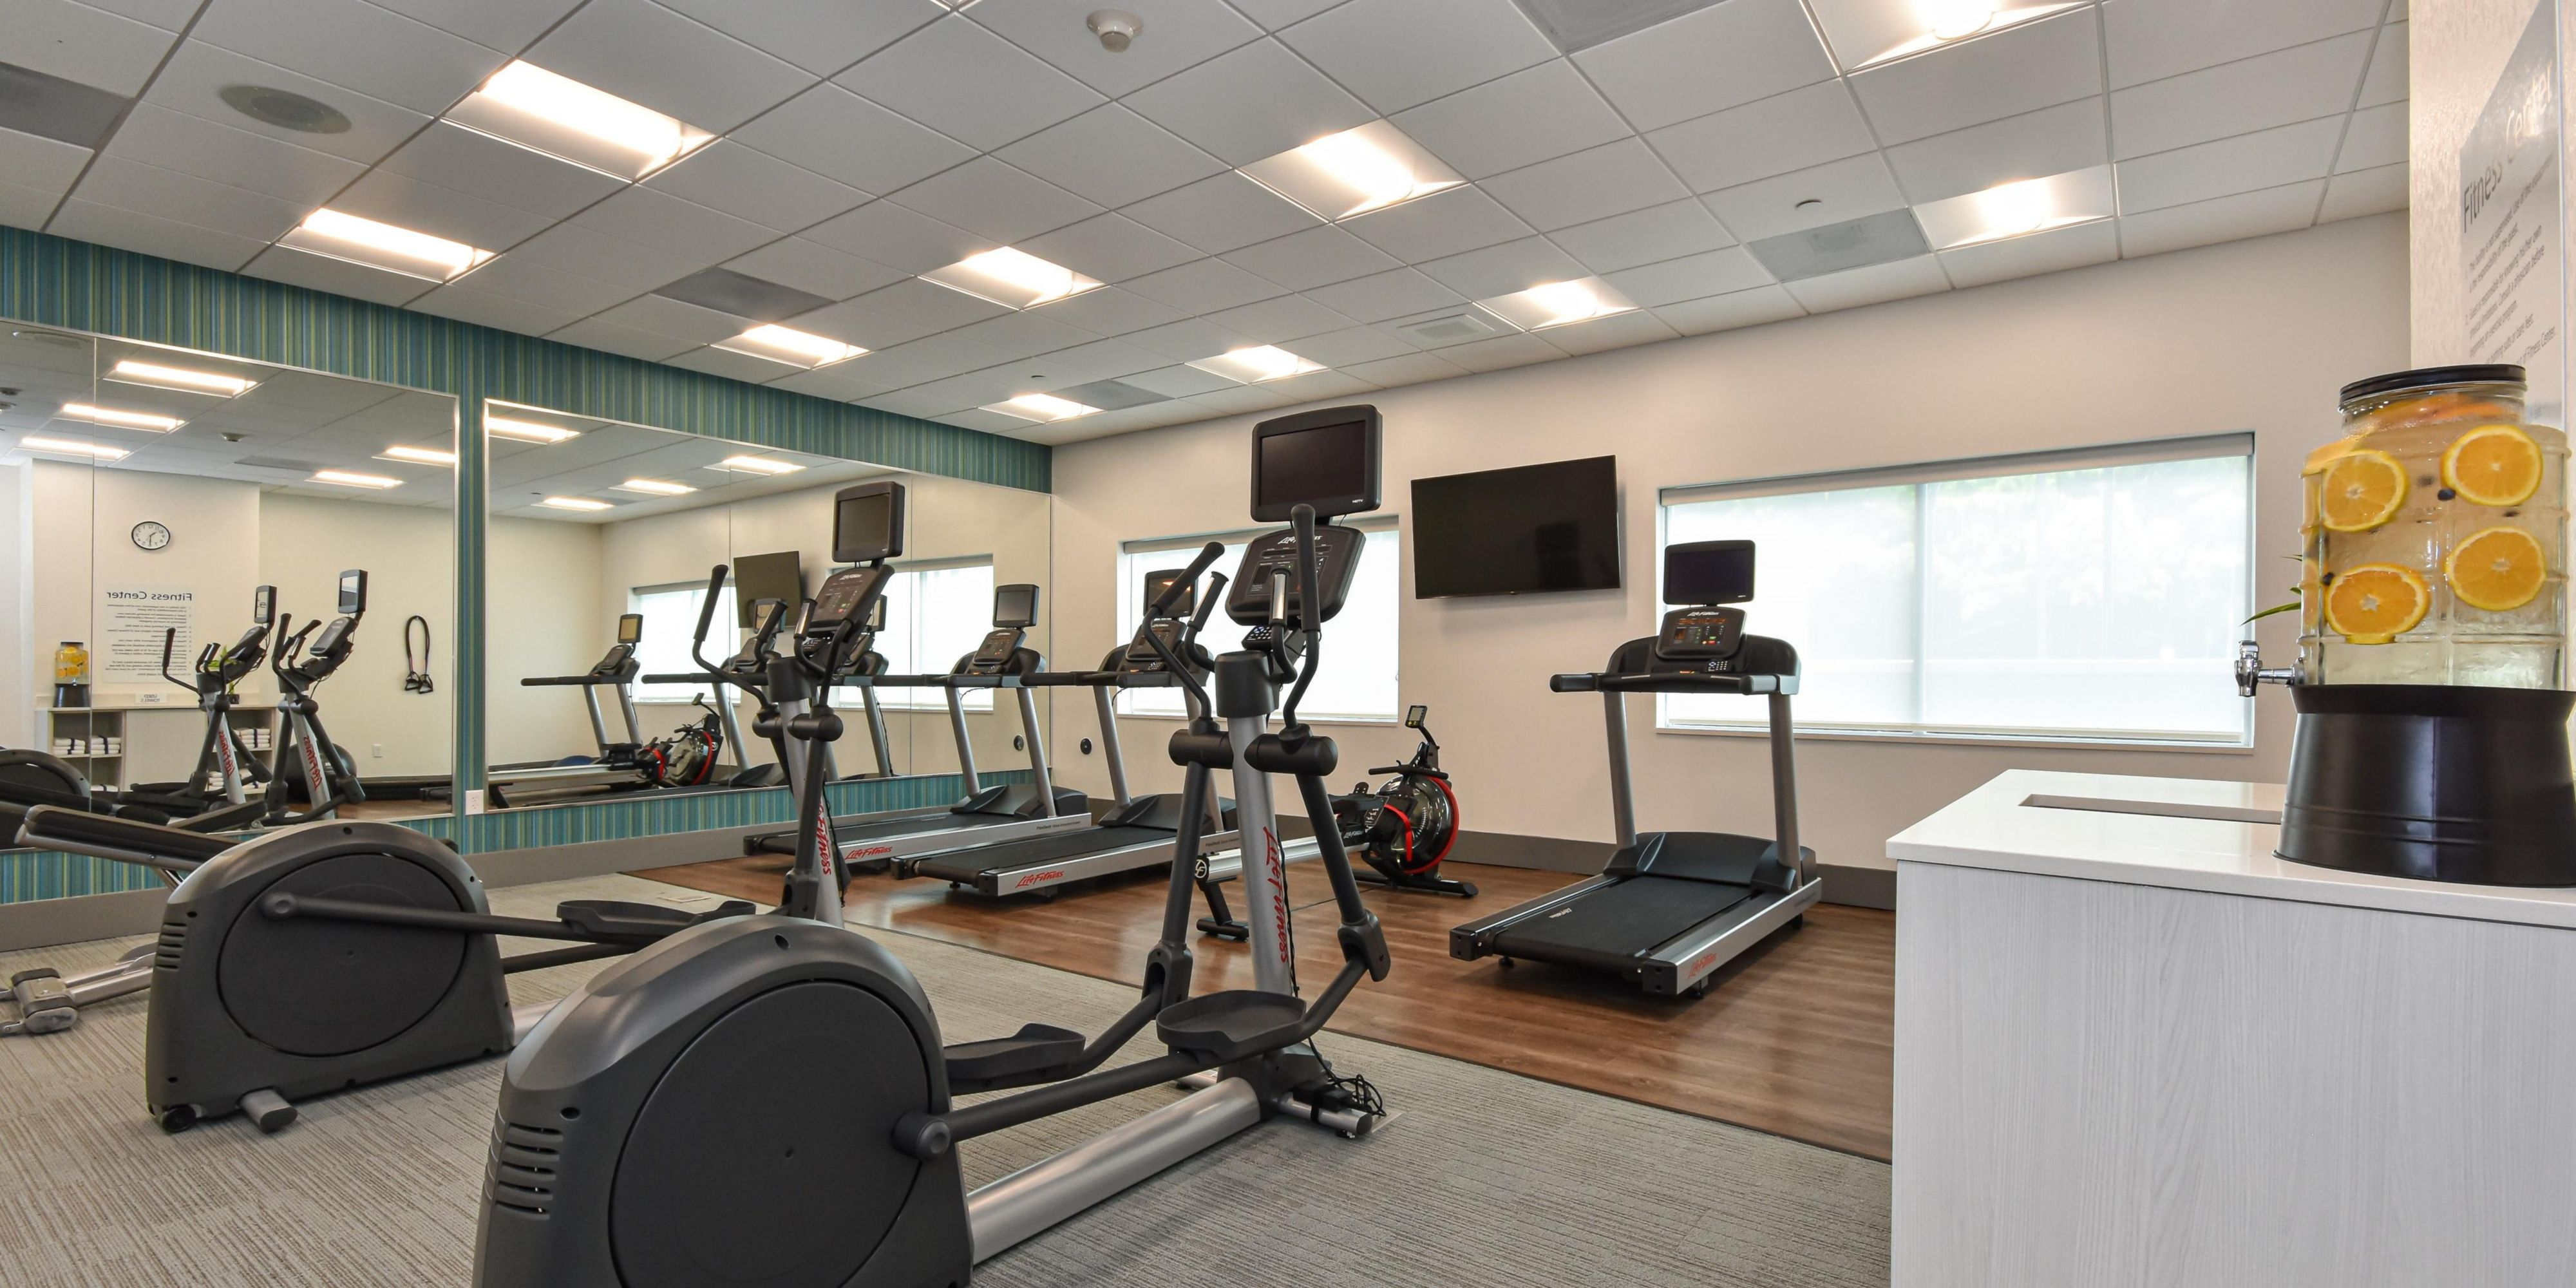 Get your sweat on in our complimentary, fully equipped Fitness Center open 24 hours.